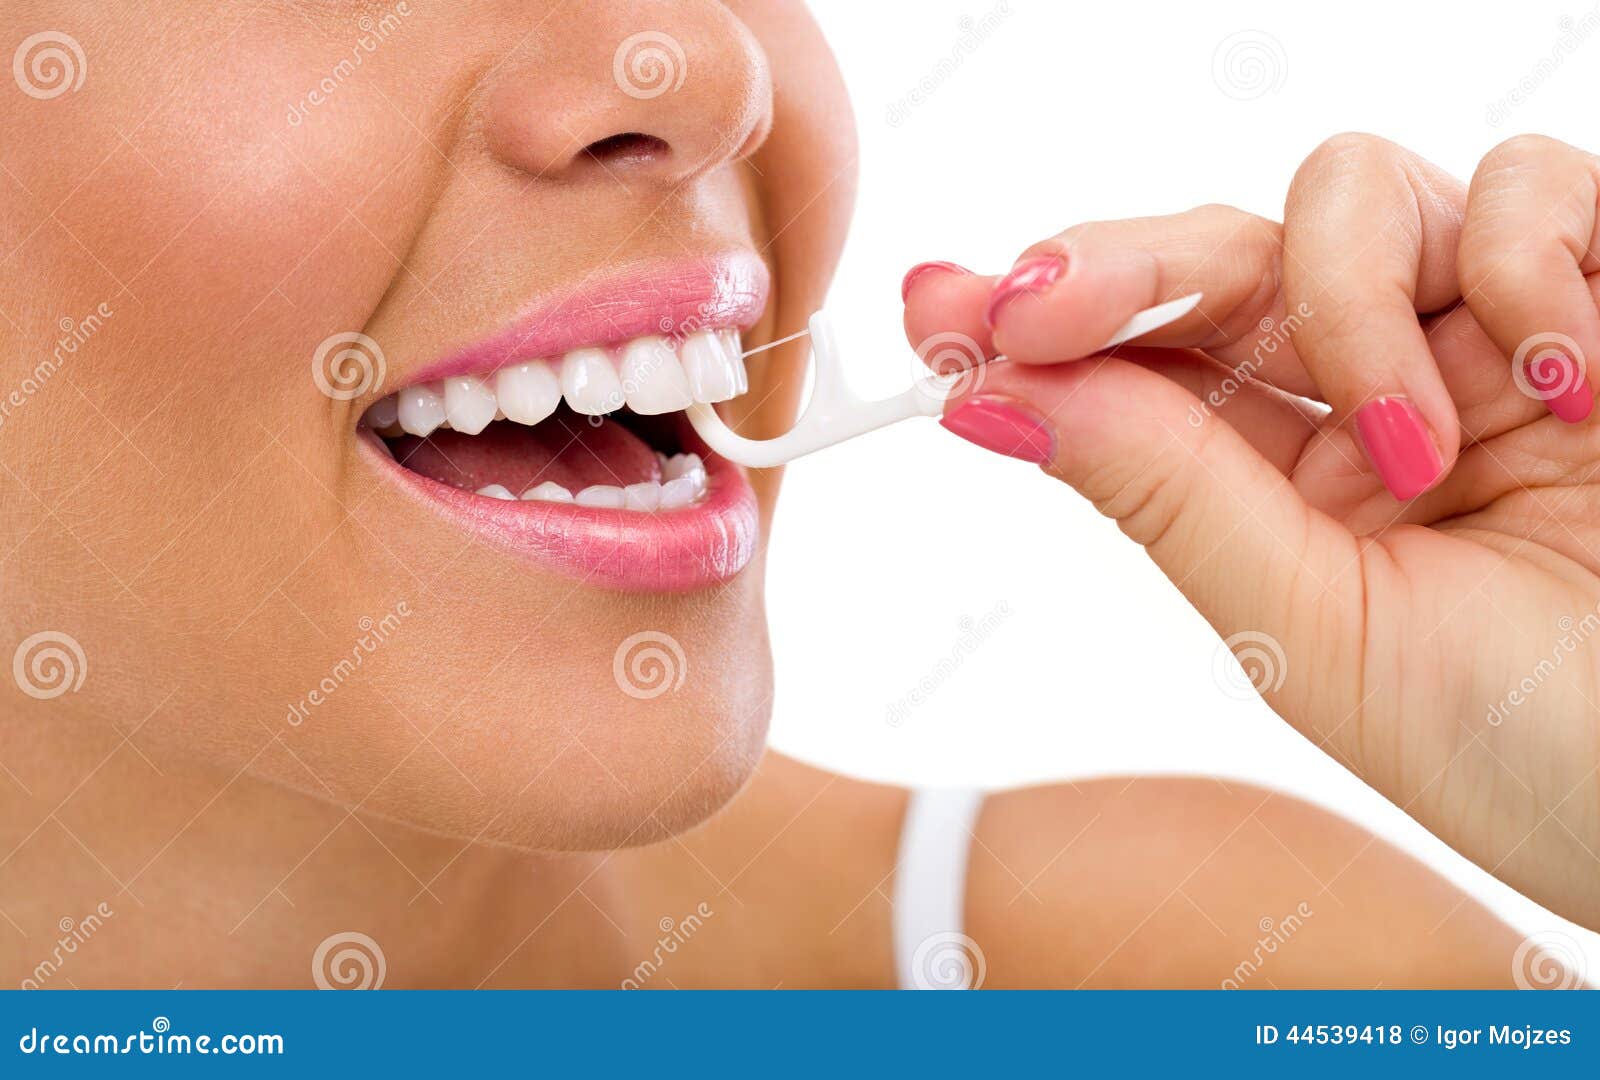 woman cleaning flossing